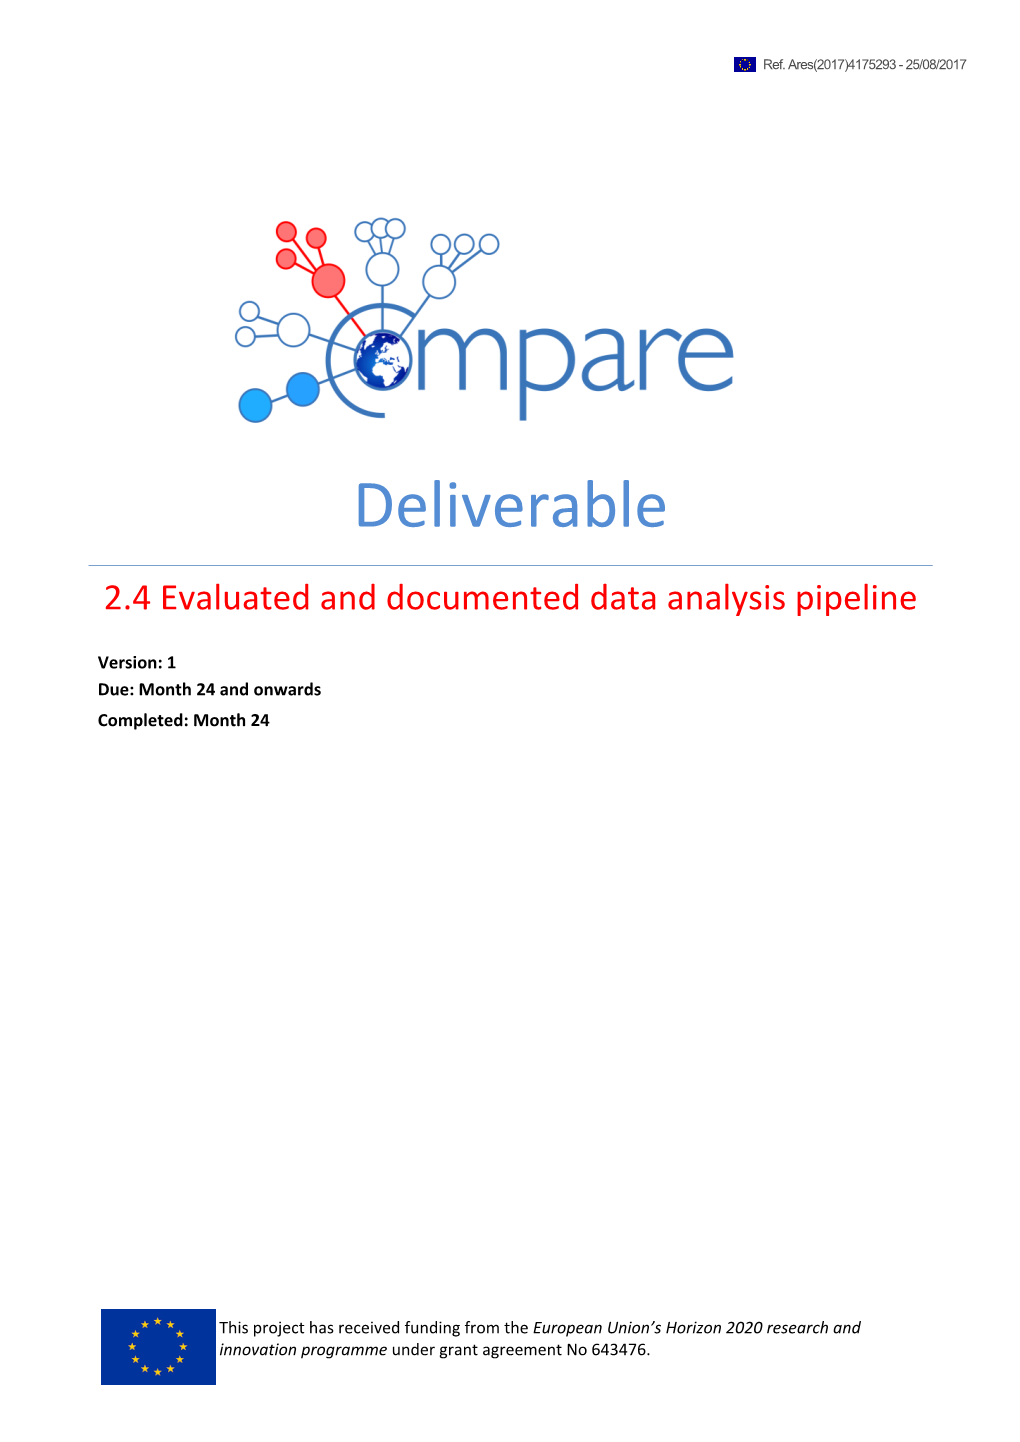 2.4 Evaluated and Documented Data Analysis Pipeline